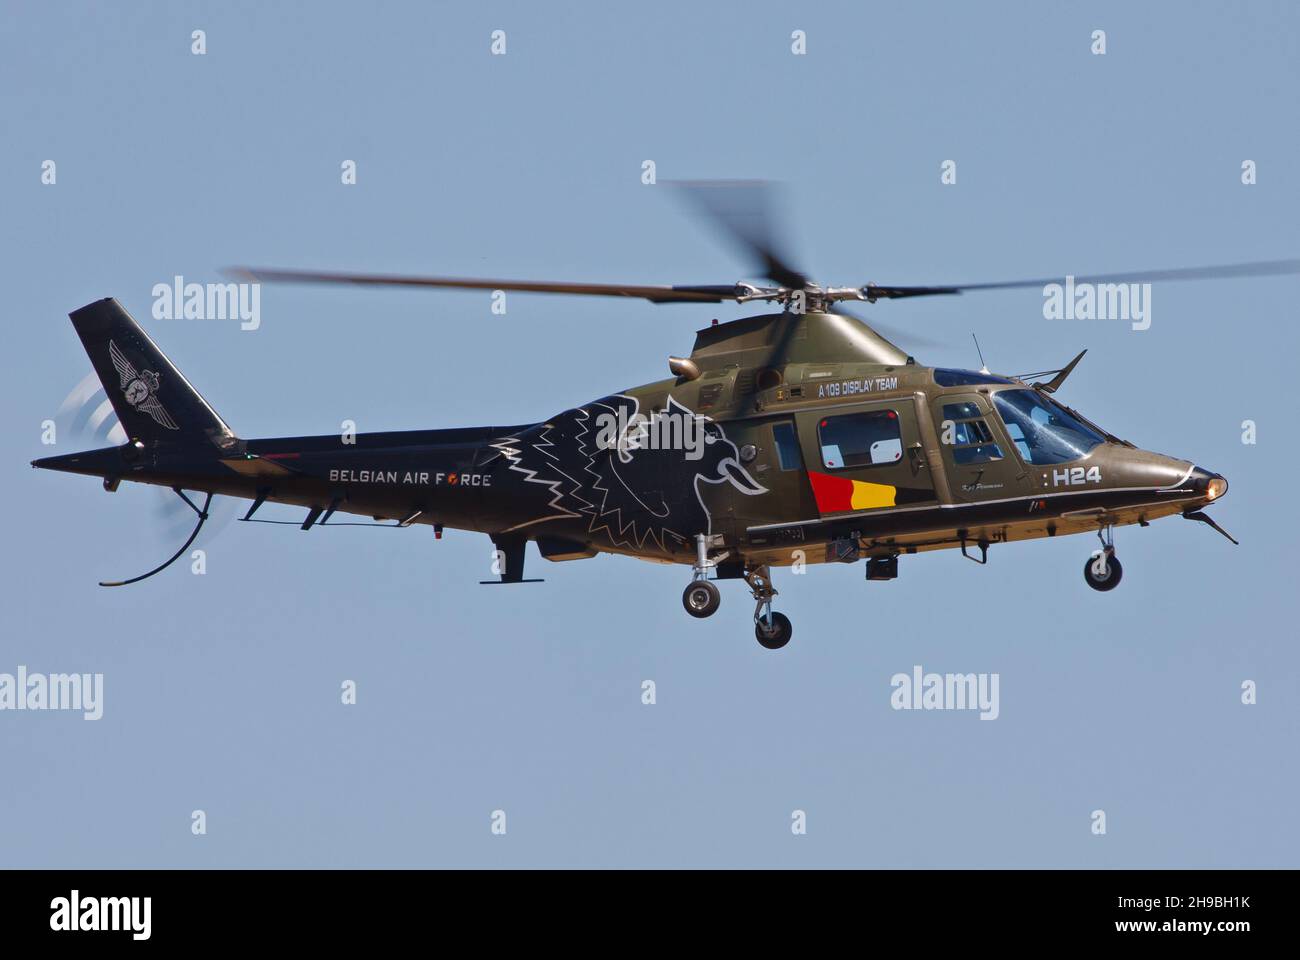 KECSKEMET, HUNGARY - Sep 29, 2013: Belgium Air Force army helicopter Agusta A109 in the air Stock Photo